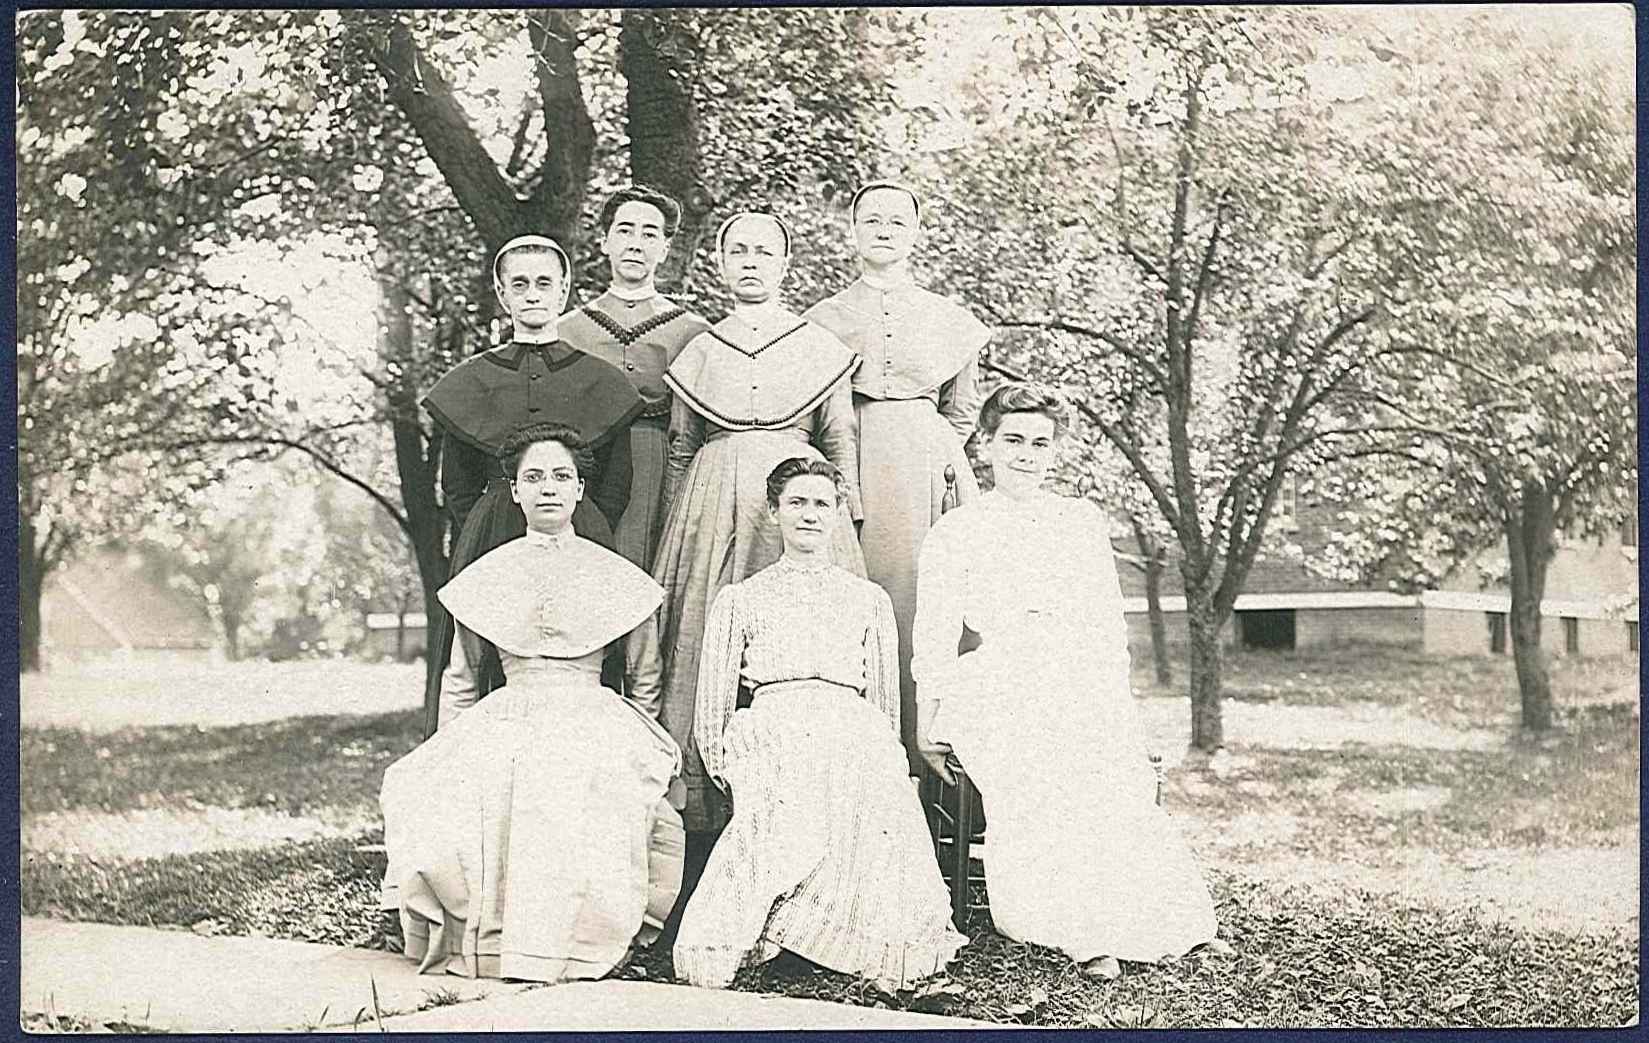 A group of women in dresses posing for a photo.